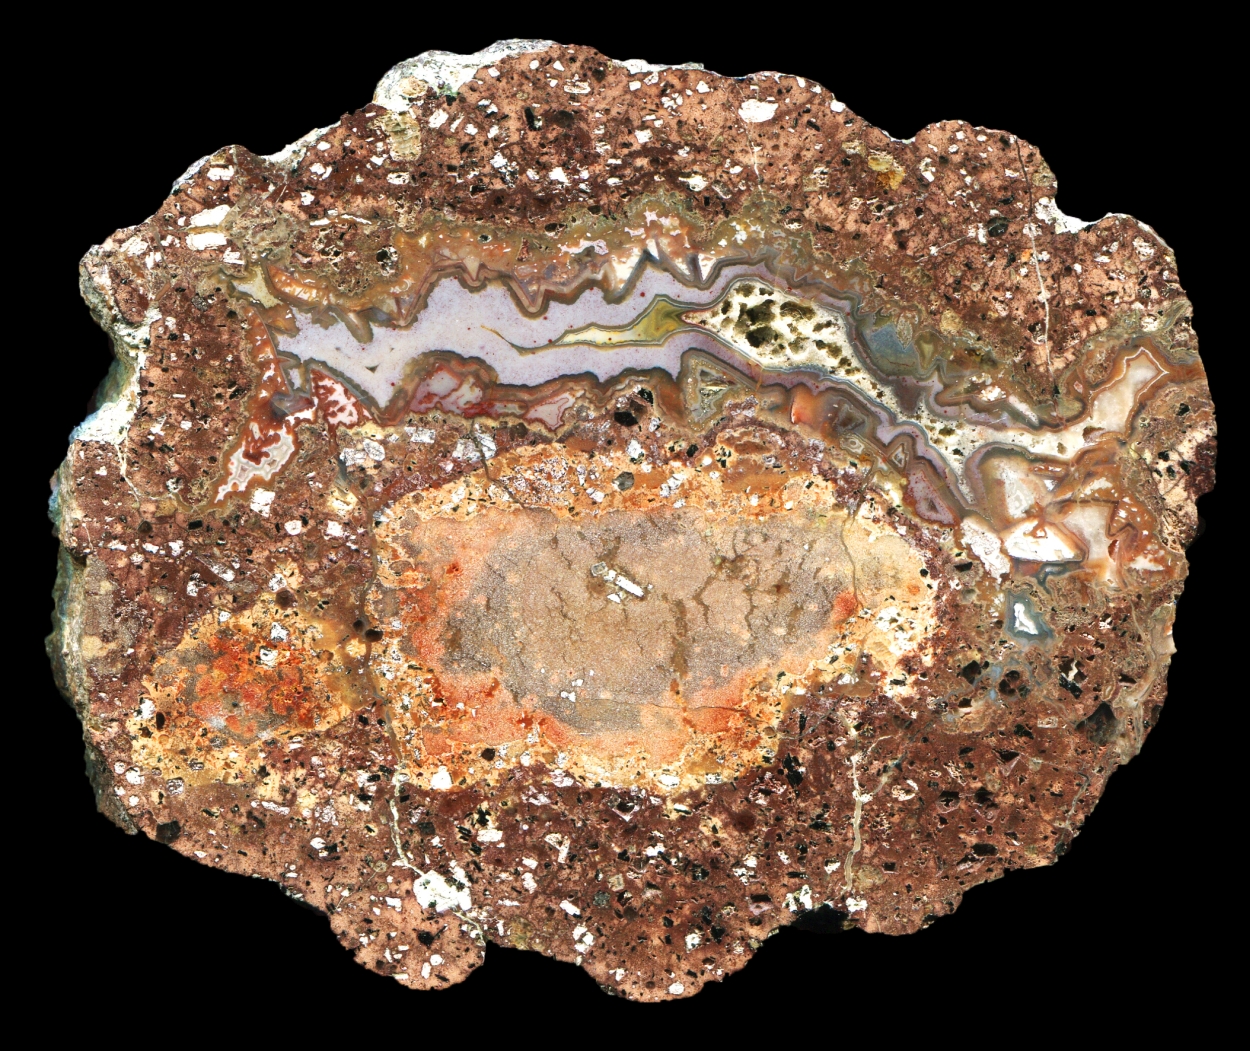 Complex Burgstall Thunderegg with Pale Agate